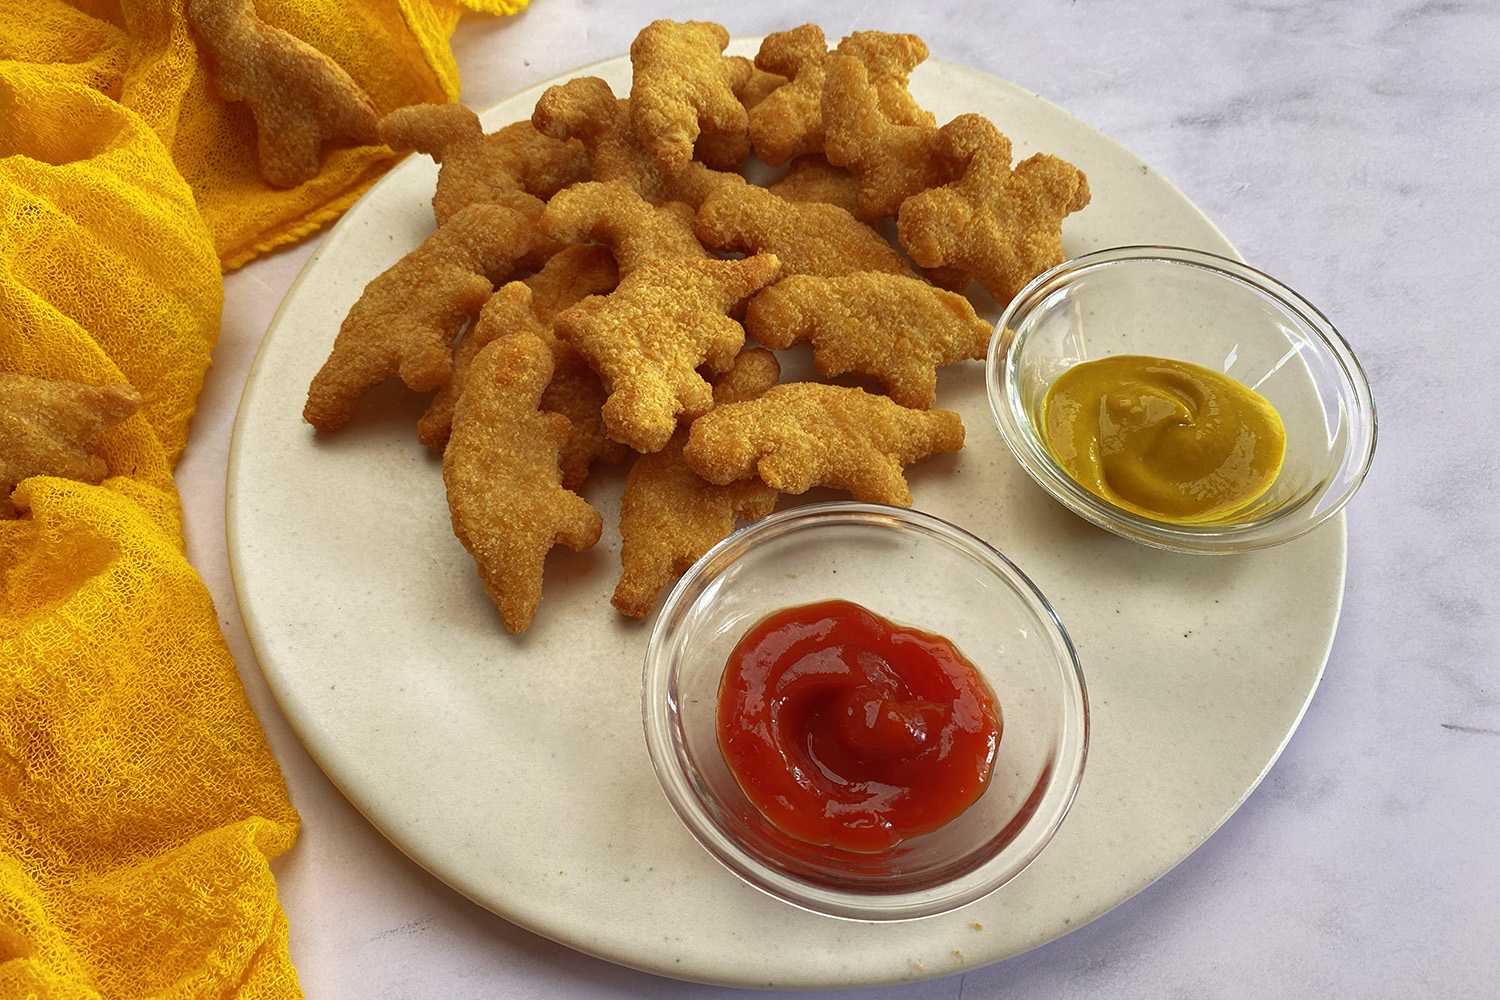 dino nuggets with ketchup and mustard